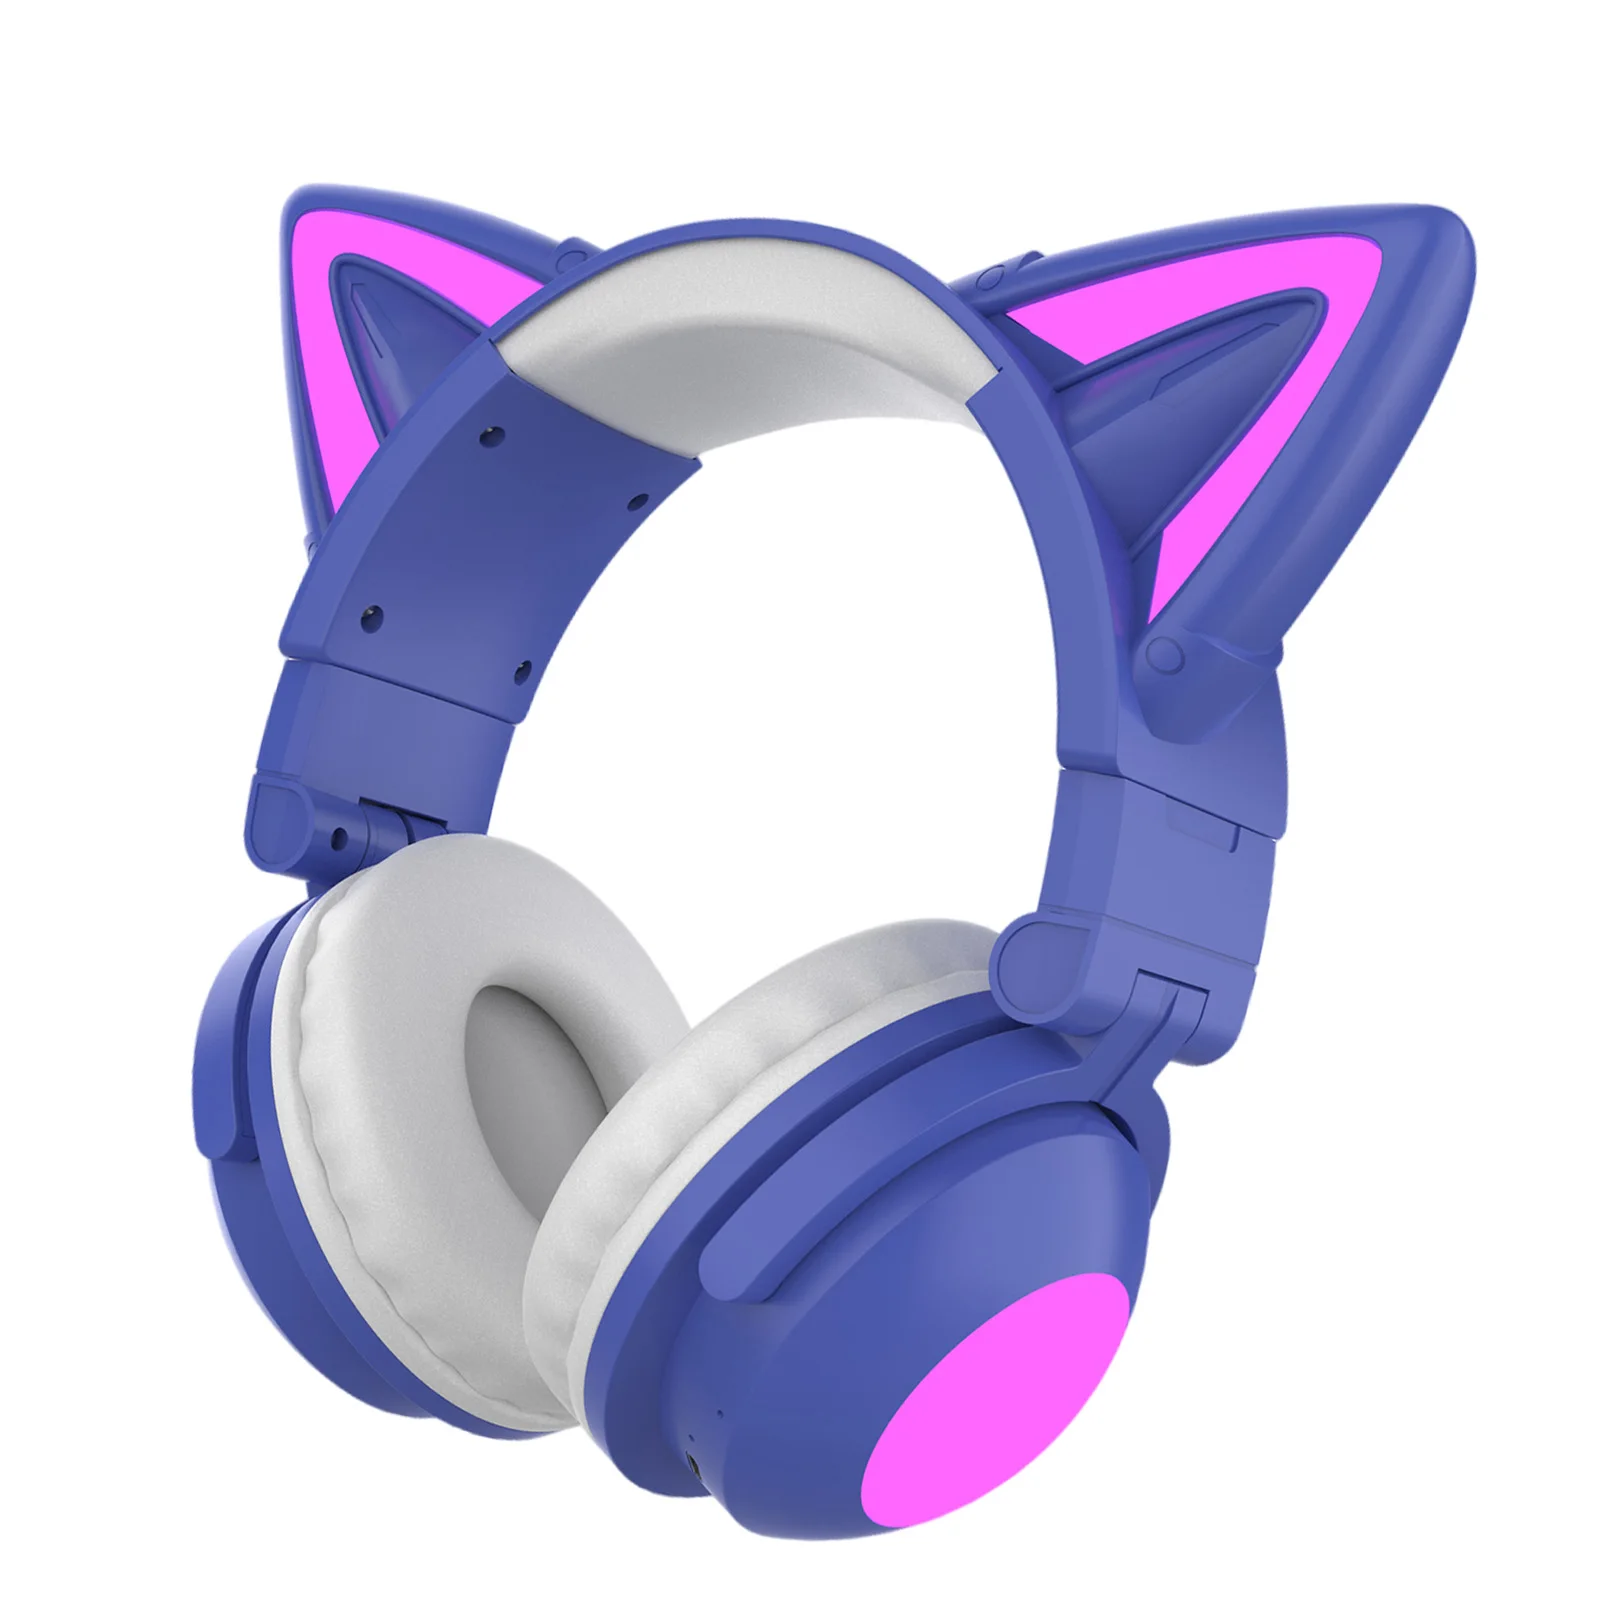 Universal Luminous Cat Ear Wireless Bluetooth Headsets Over the Ear Stereo Headphones Microphones Mic Speaker New